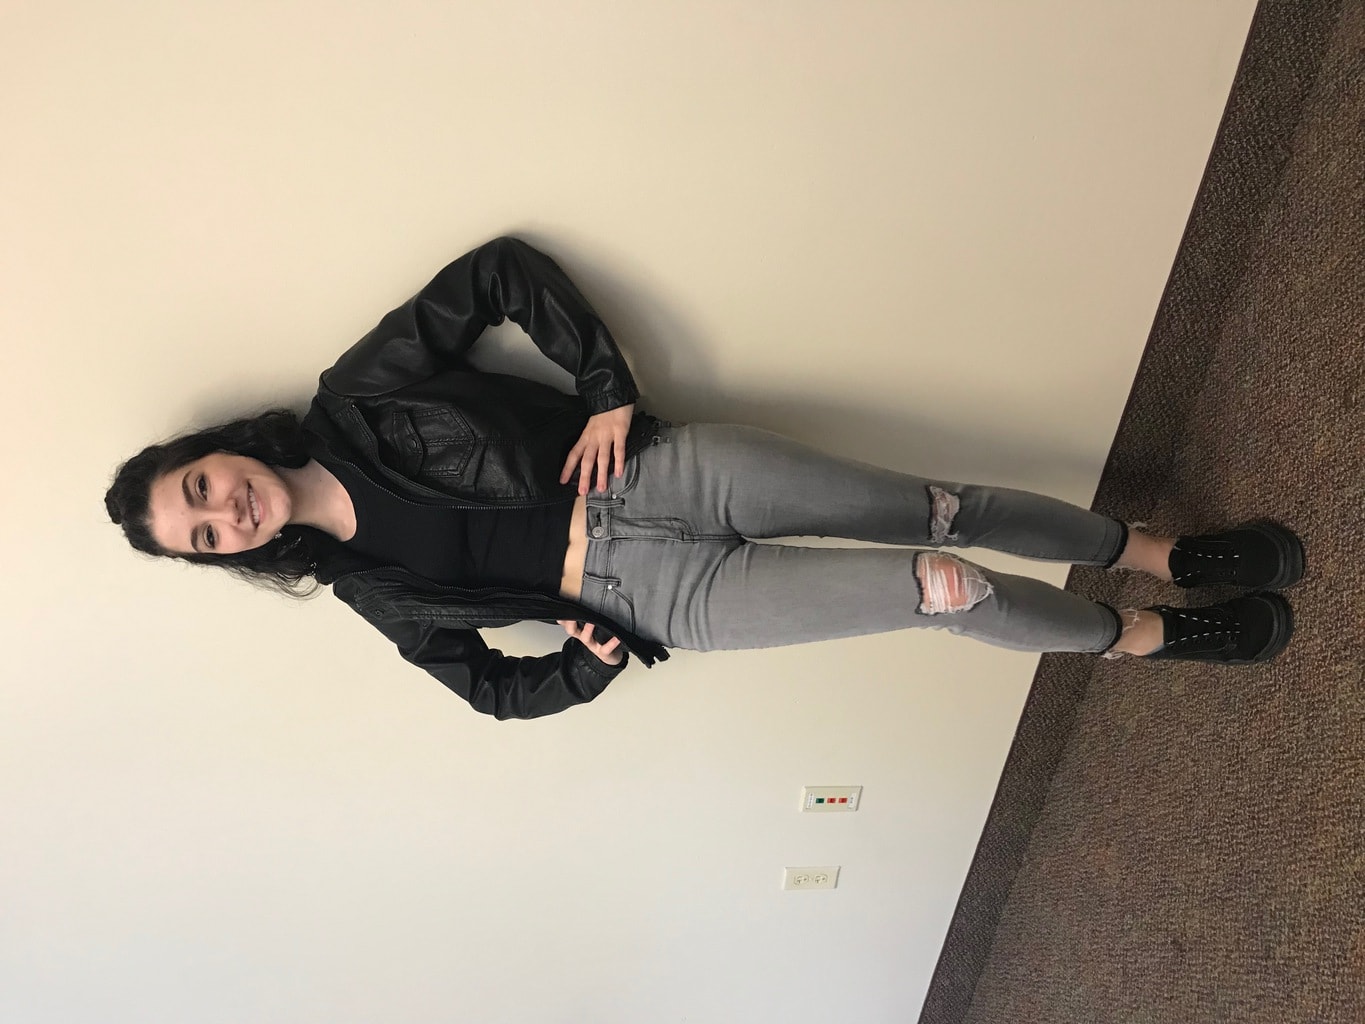 Mercyhust University student Cara sports a black and grey ensemble made up of a black cropped tee and layered motorcycle jacket with a hood, grey distressed denim jeans, and flat black Vans sneakers.